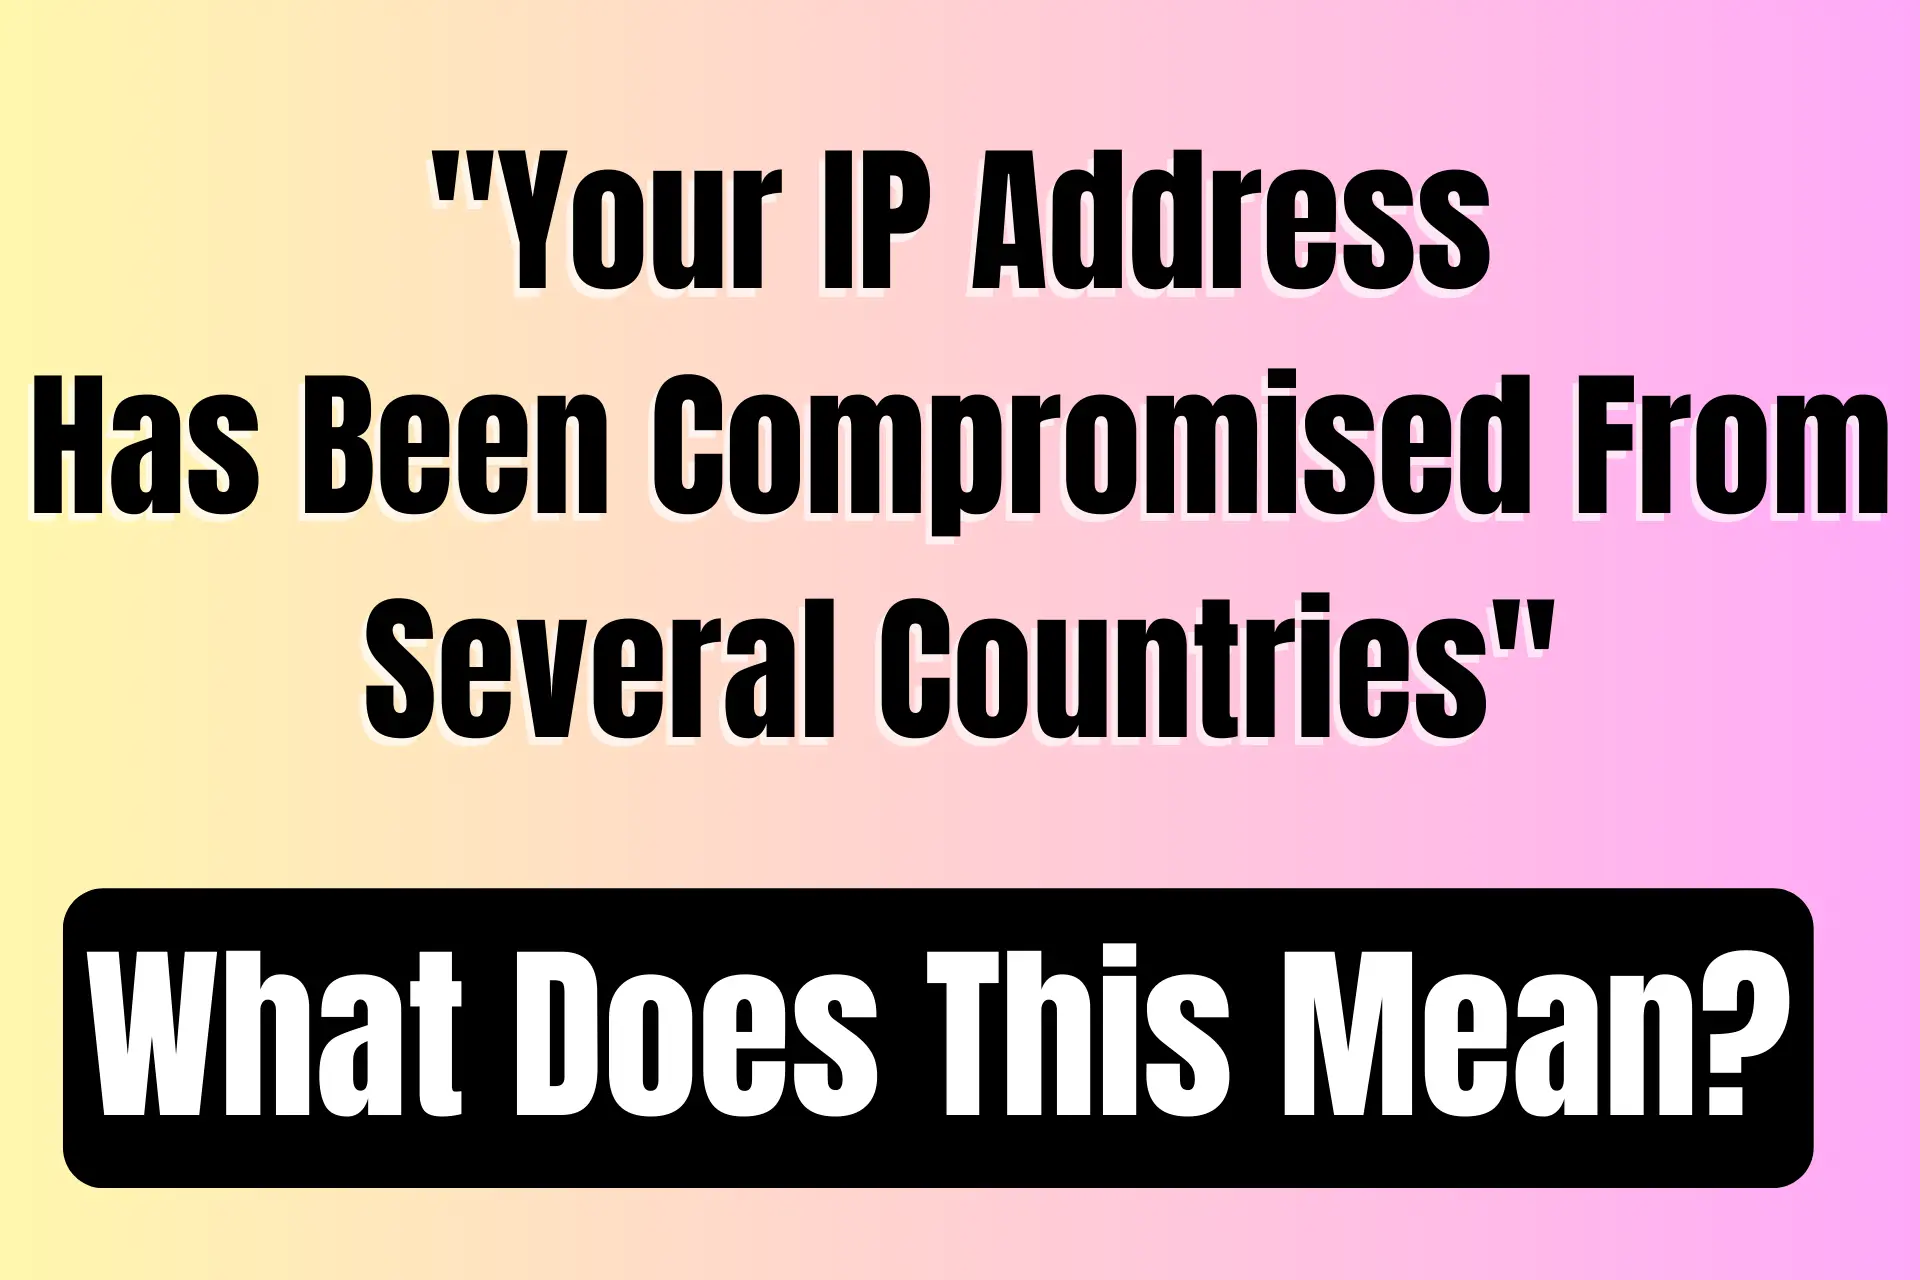 Your IP address has been compromised from several countries